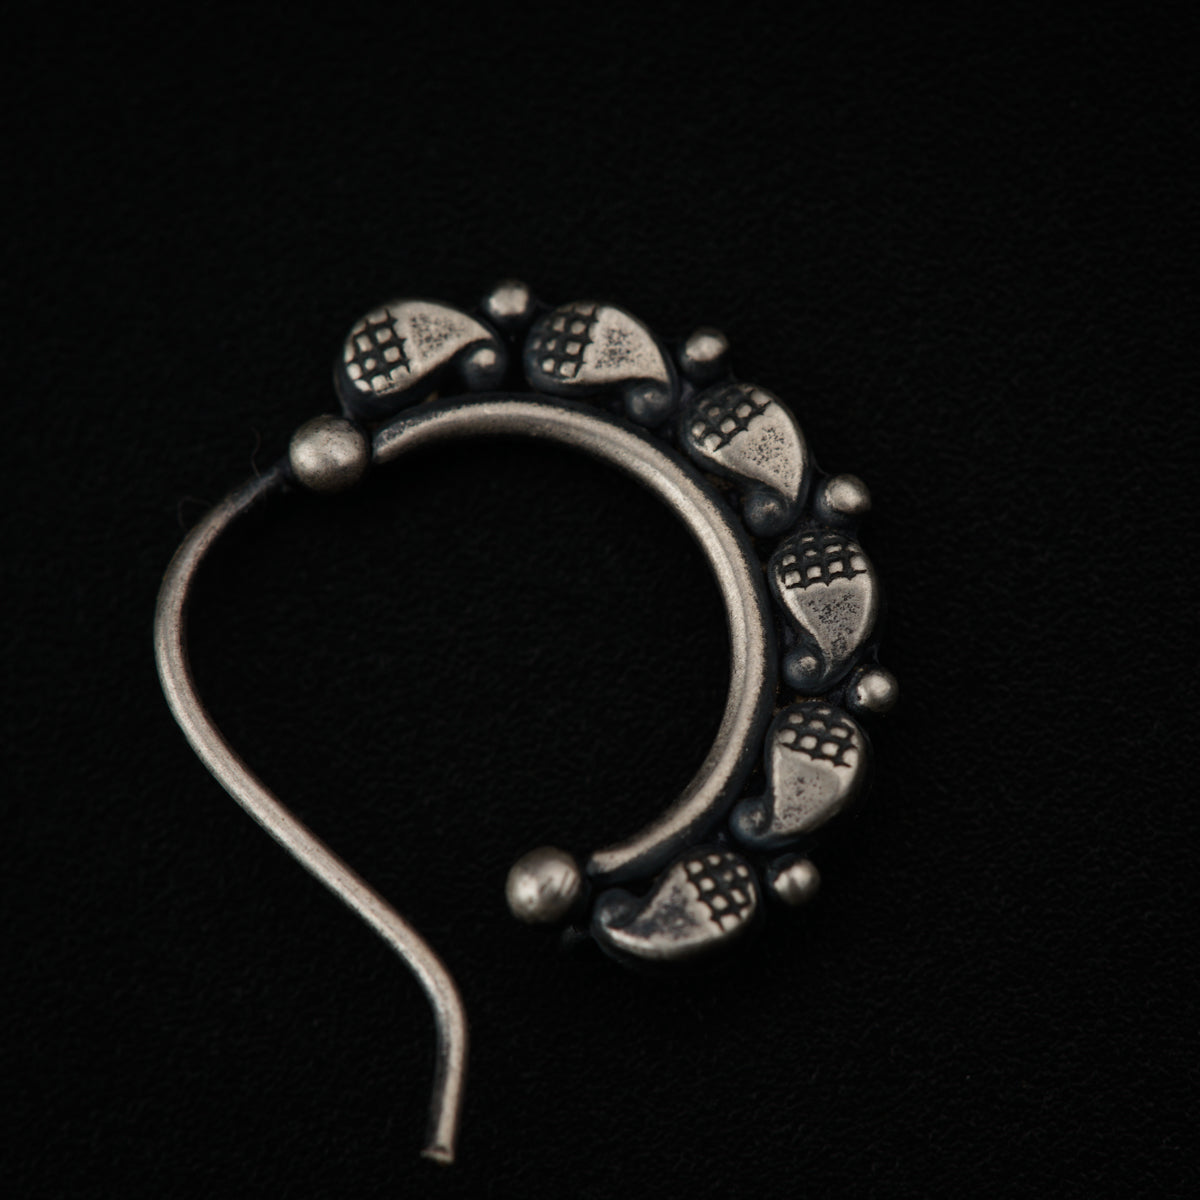 a pair of silver colored ear rings on a black background